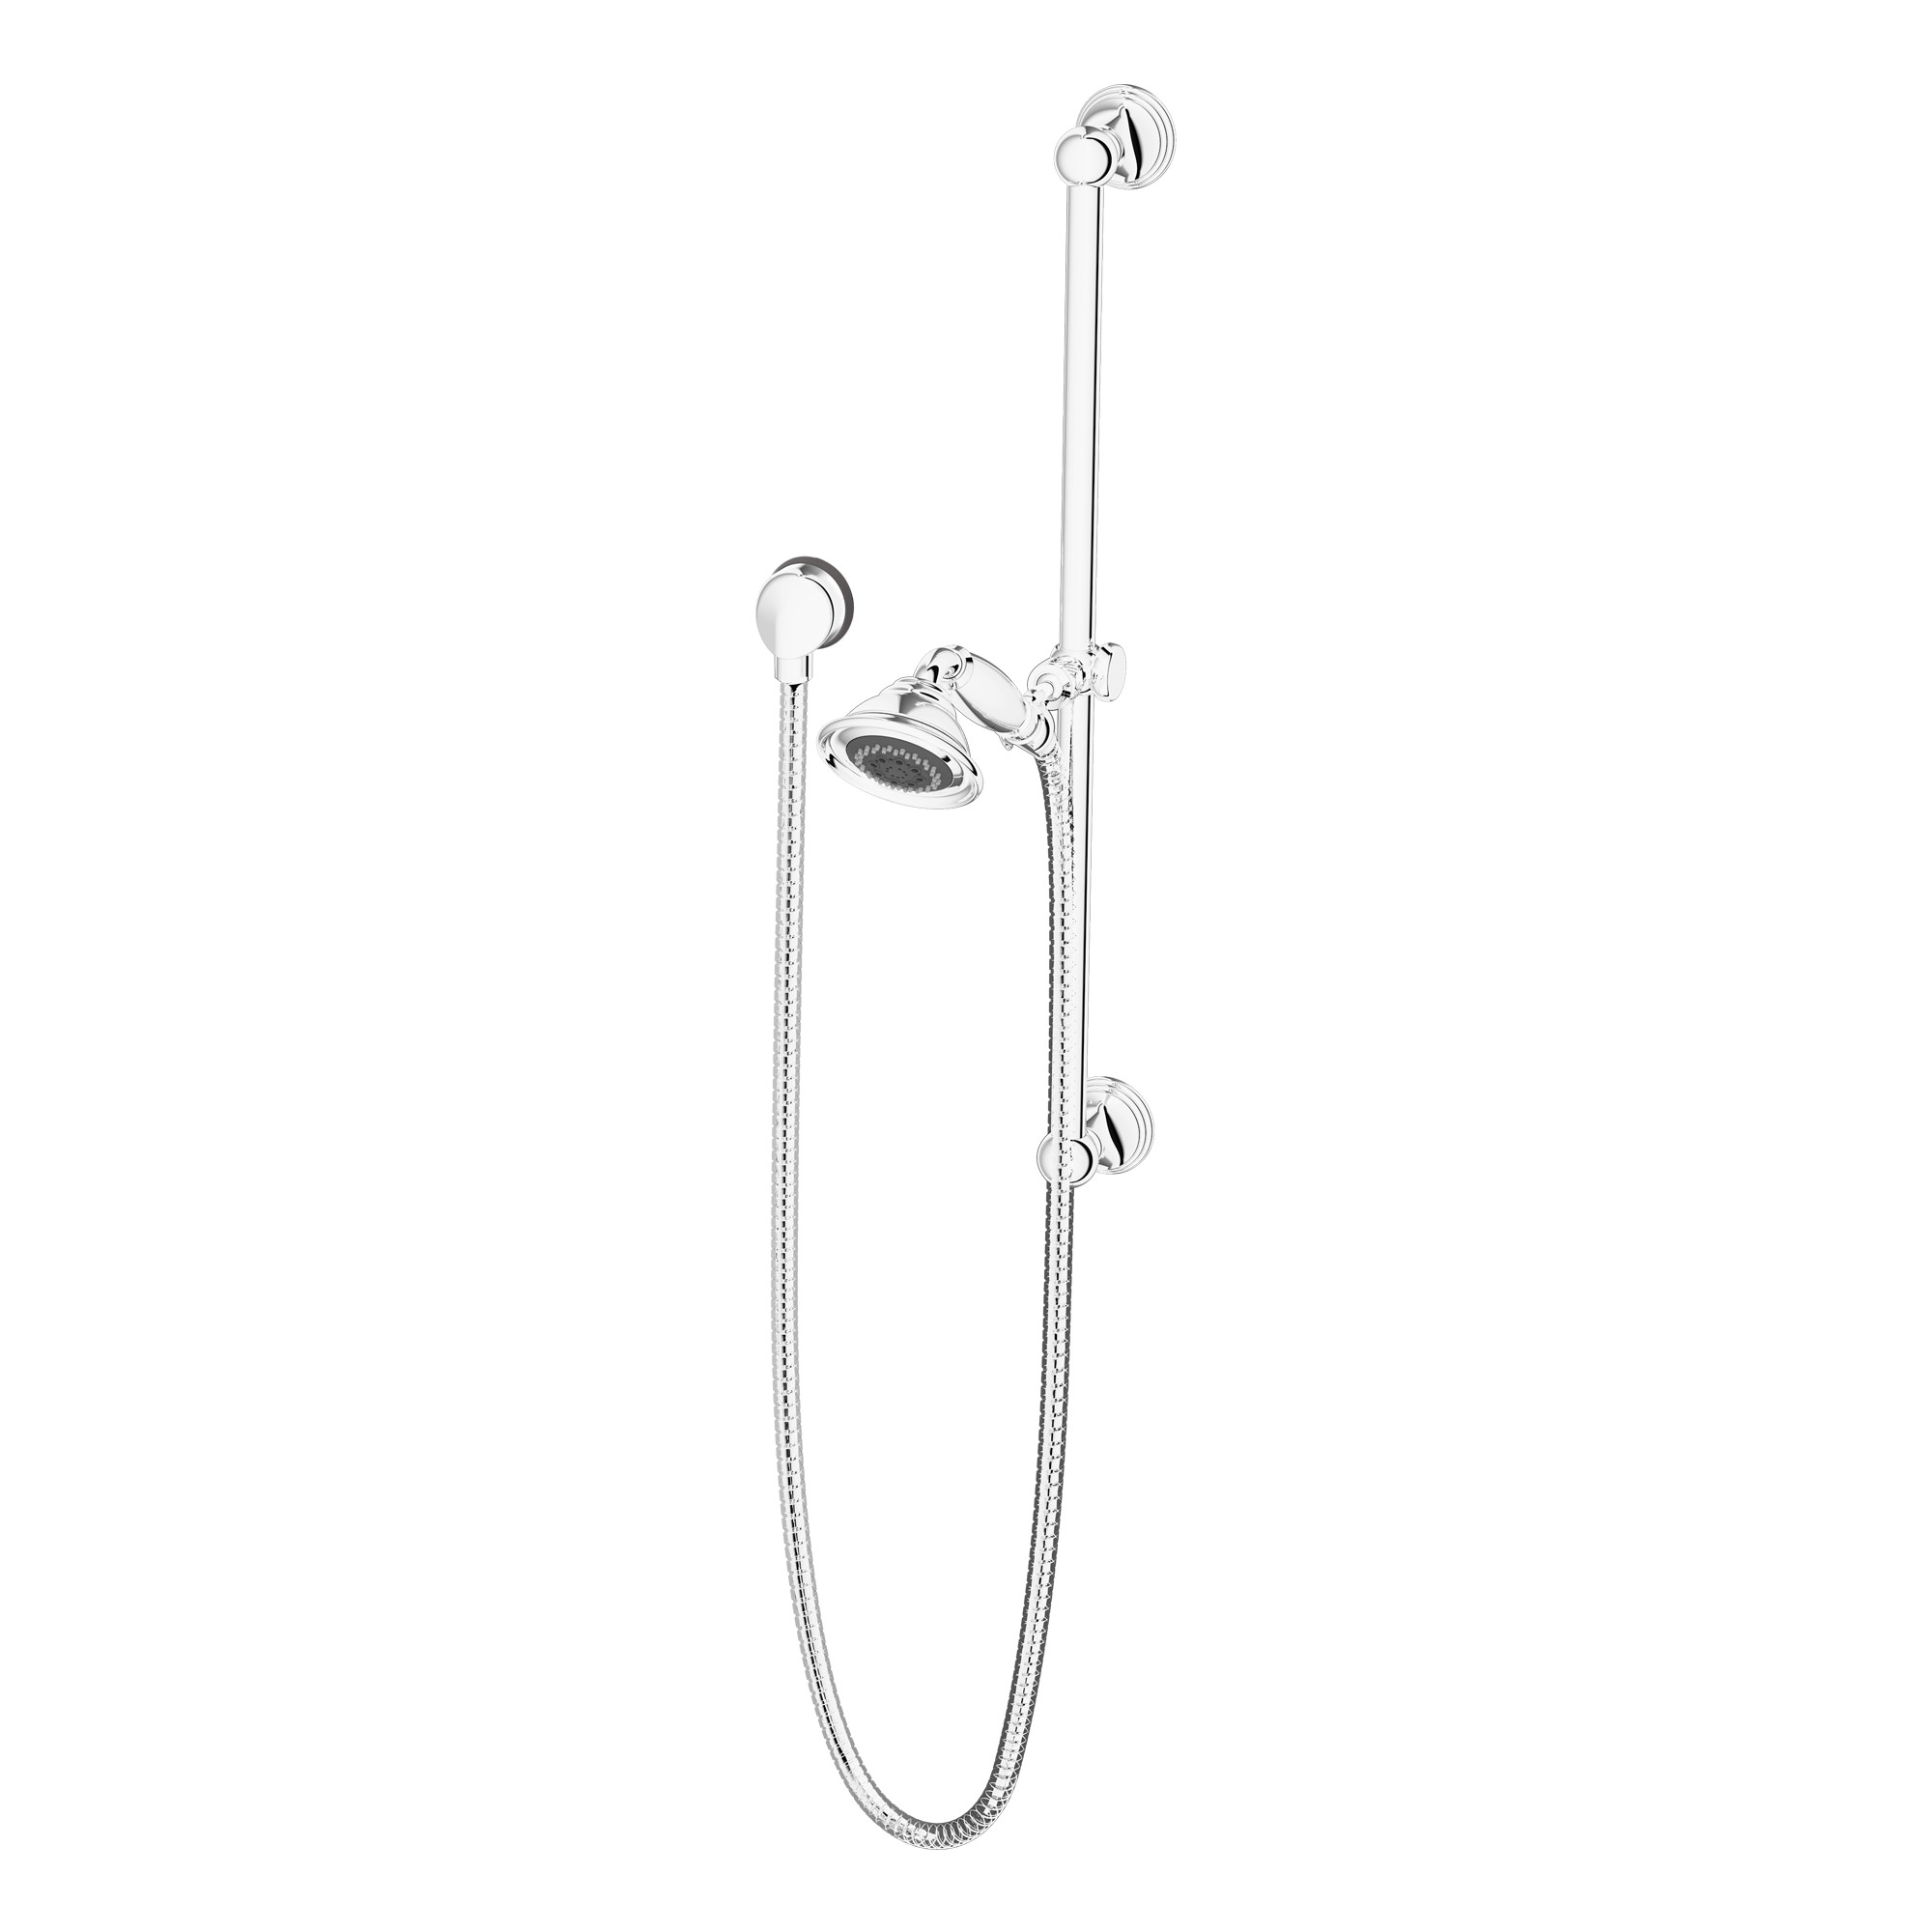 Ashbee Personal Hand Shower Set with Adjustable 24 in. Slide Bar